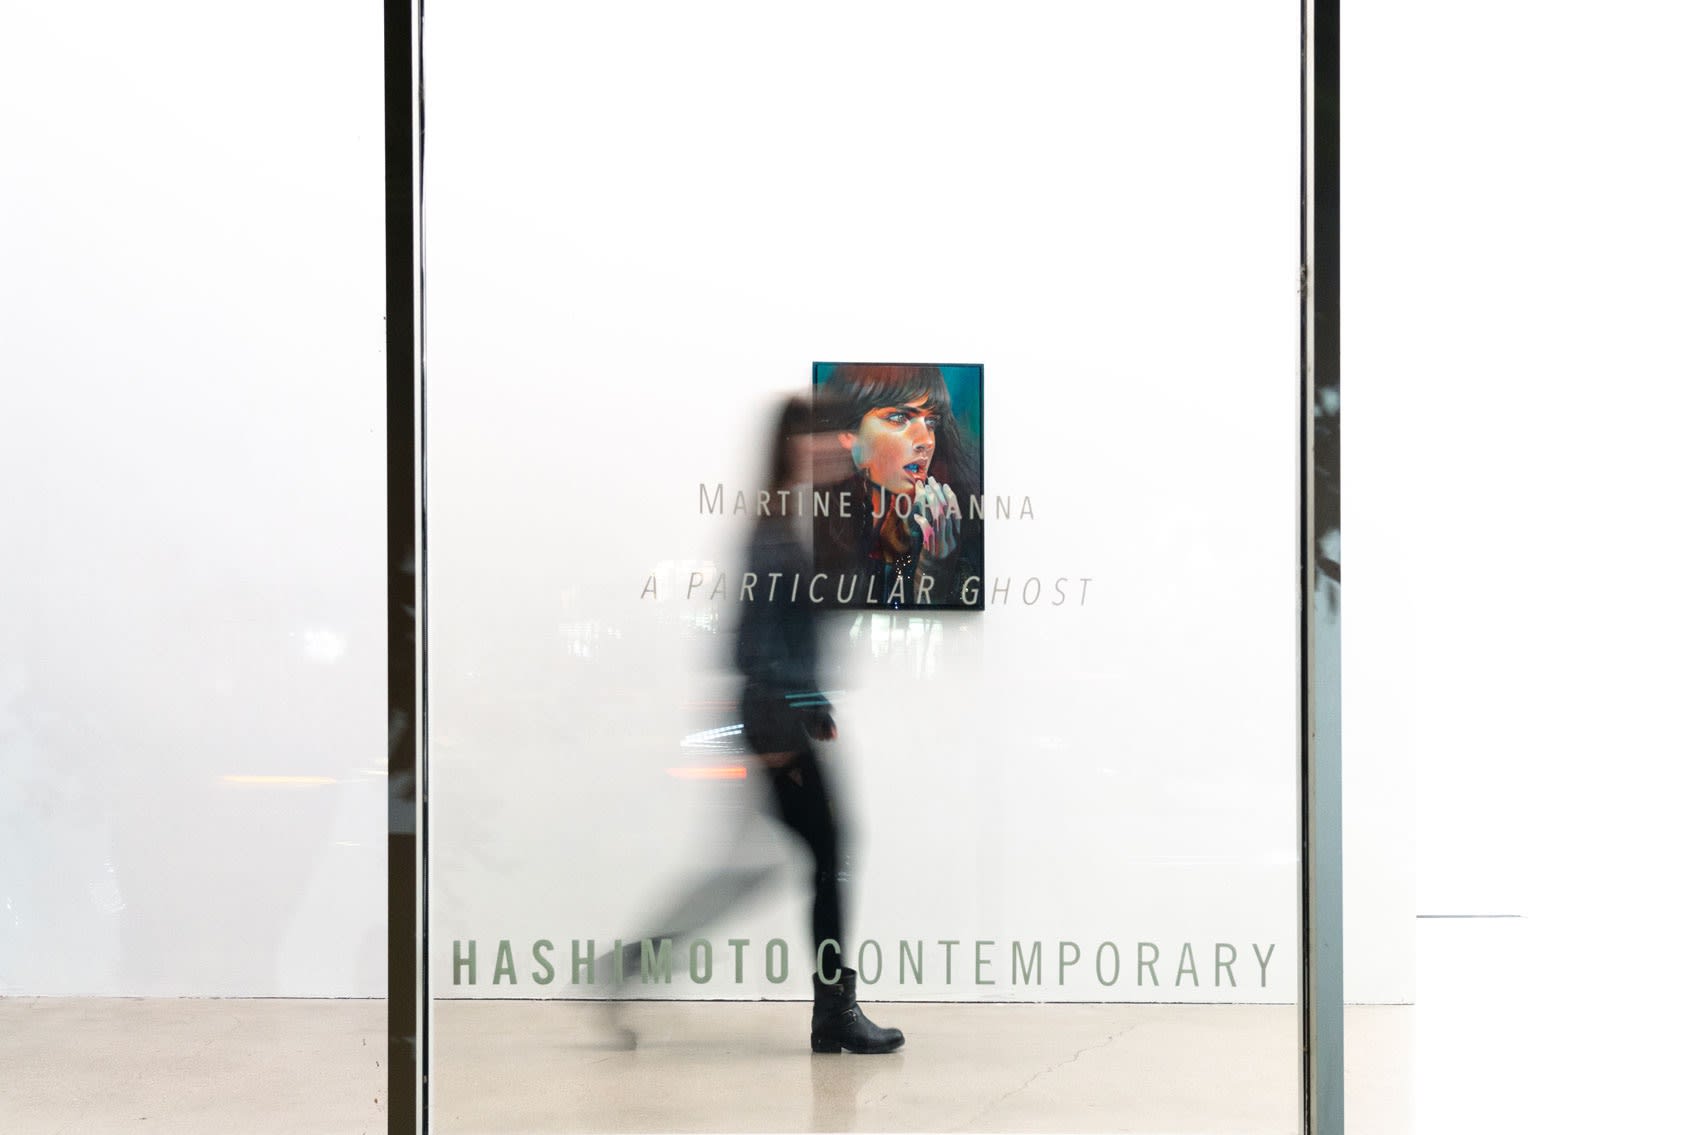 A long exposure shot of a woman walking past a painting of the head of a woman taken from outside of the art gallery. The woman walked down a hallway with floor to ceiling windows, passing the text 